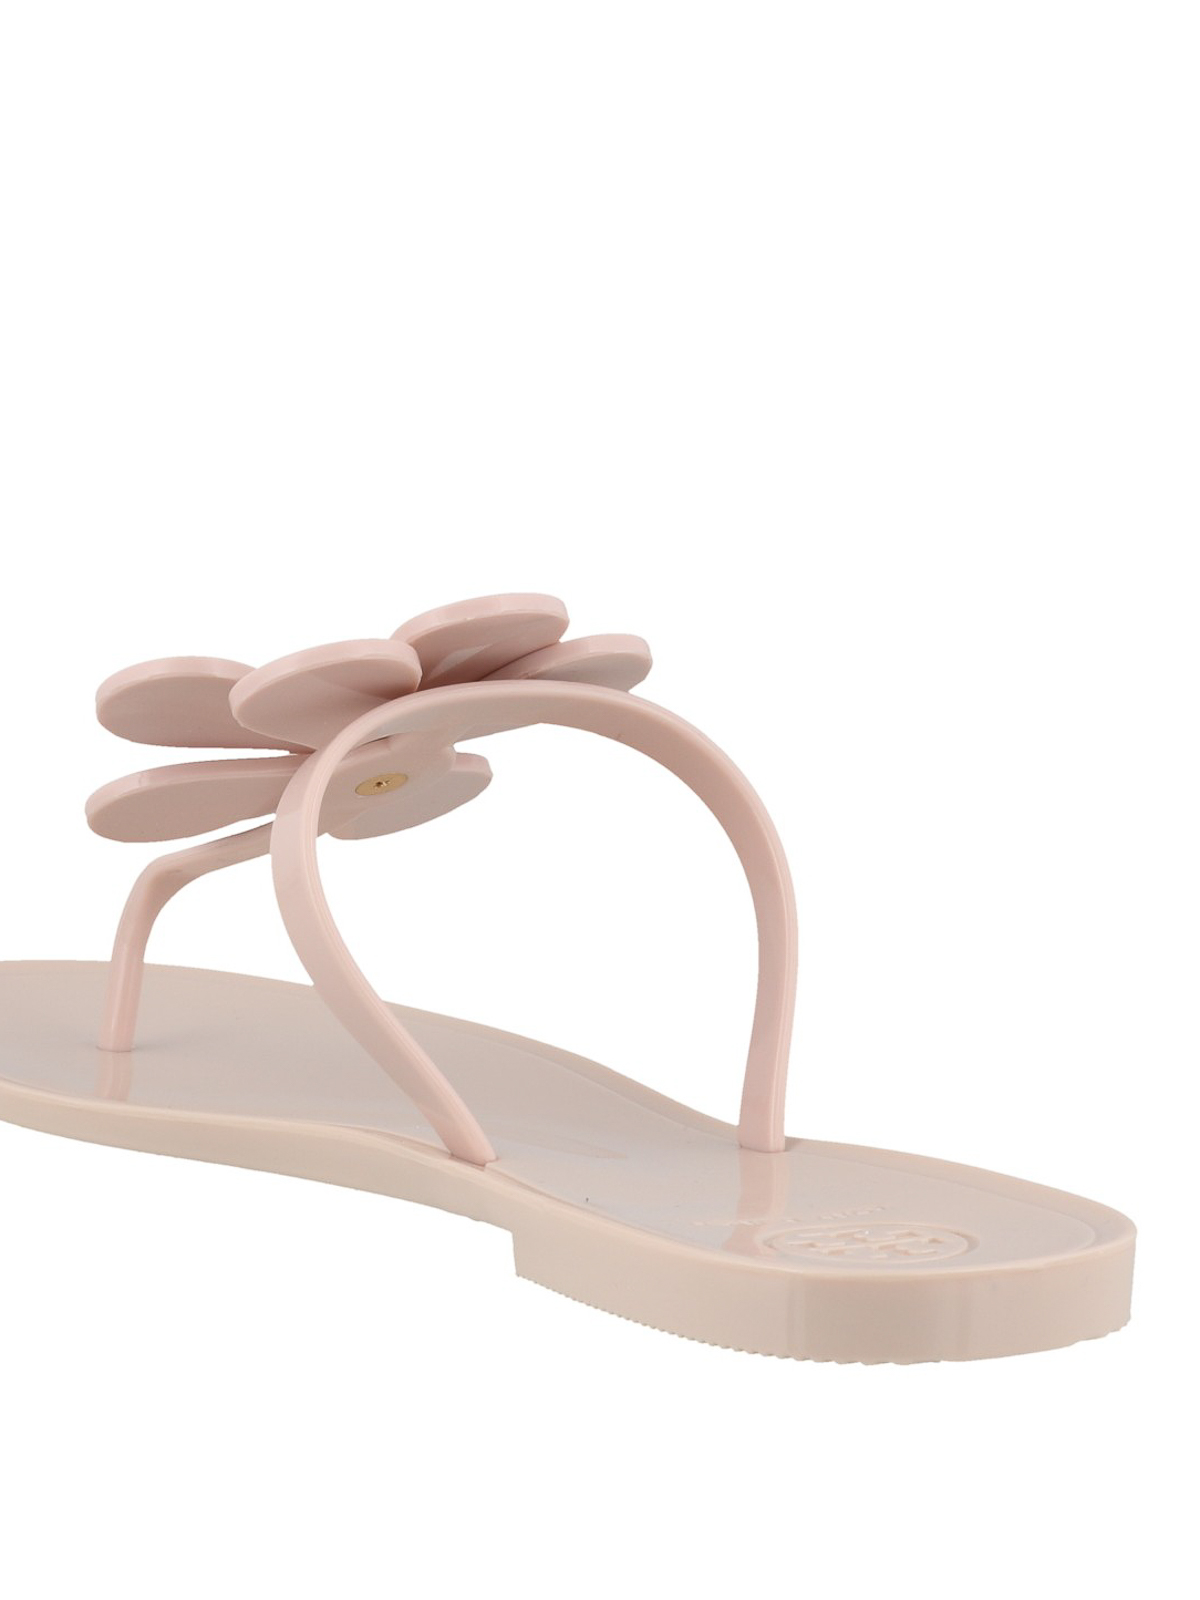 Tory Burch Blossom Jelly Thong Sandals in Pink